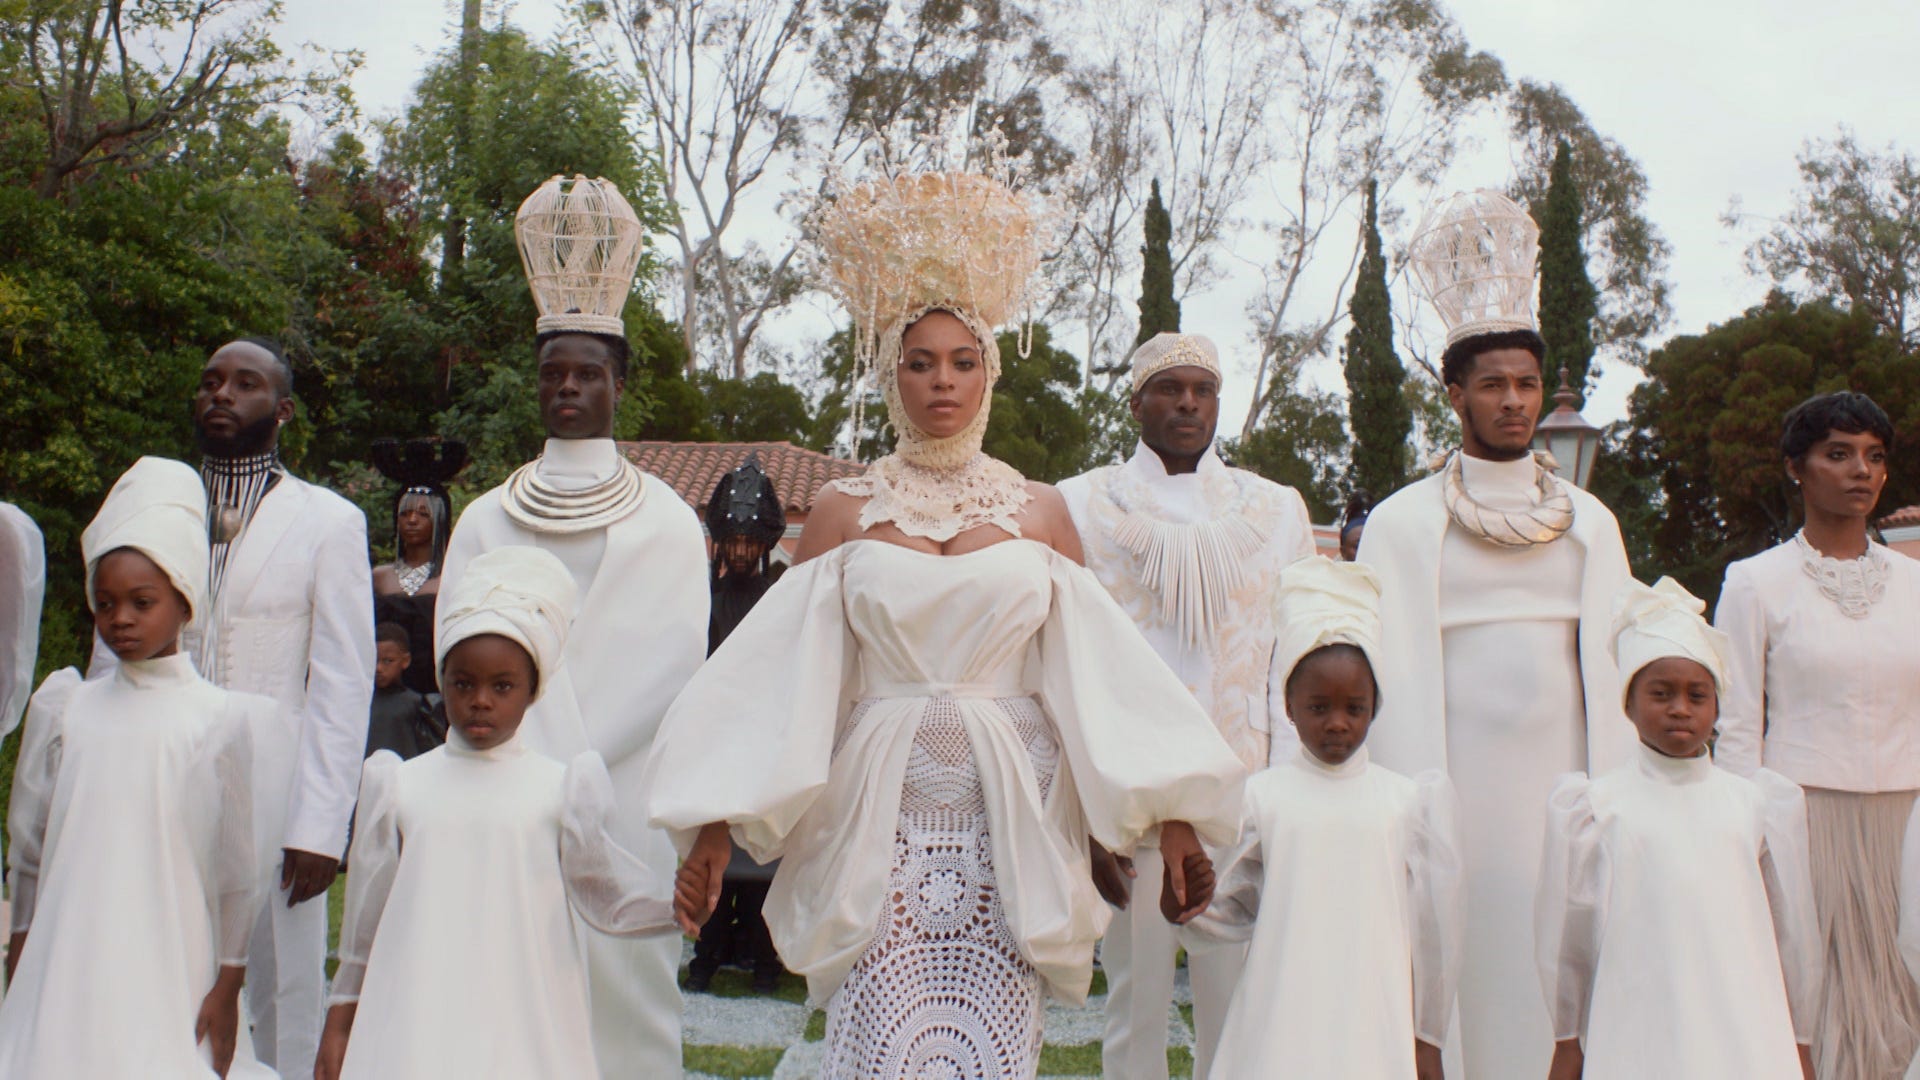 Beyonce’s Visual Album ‘Black is King’ to Premiere Exclusively on Disney+ July 31